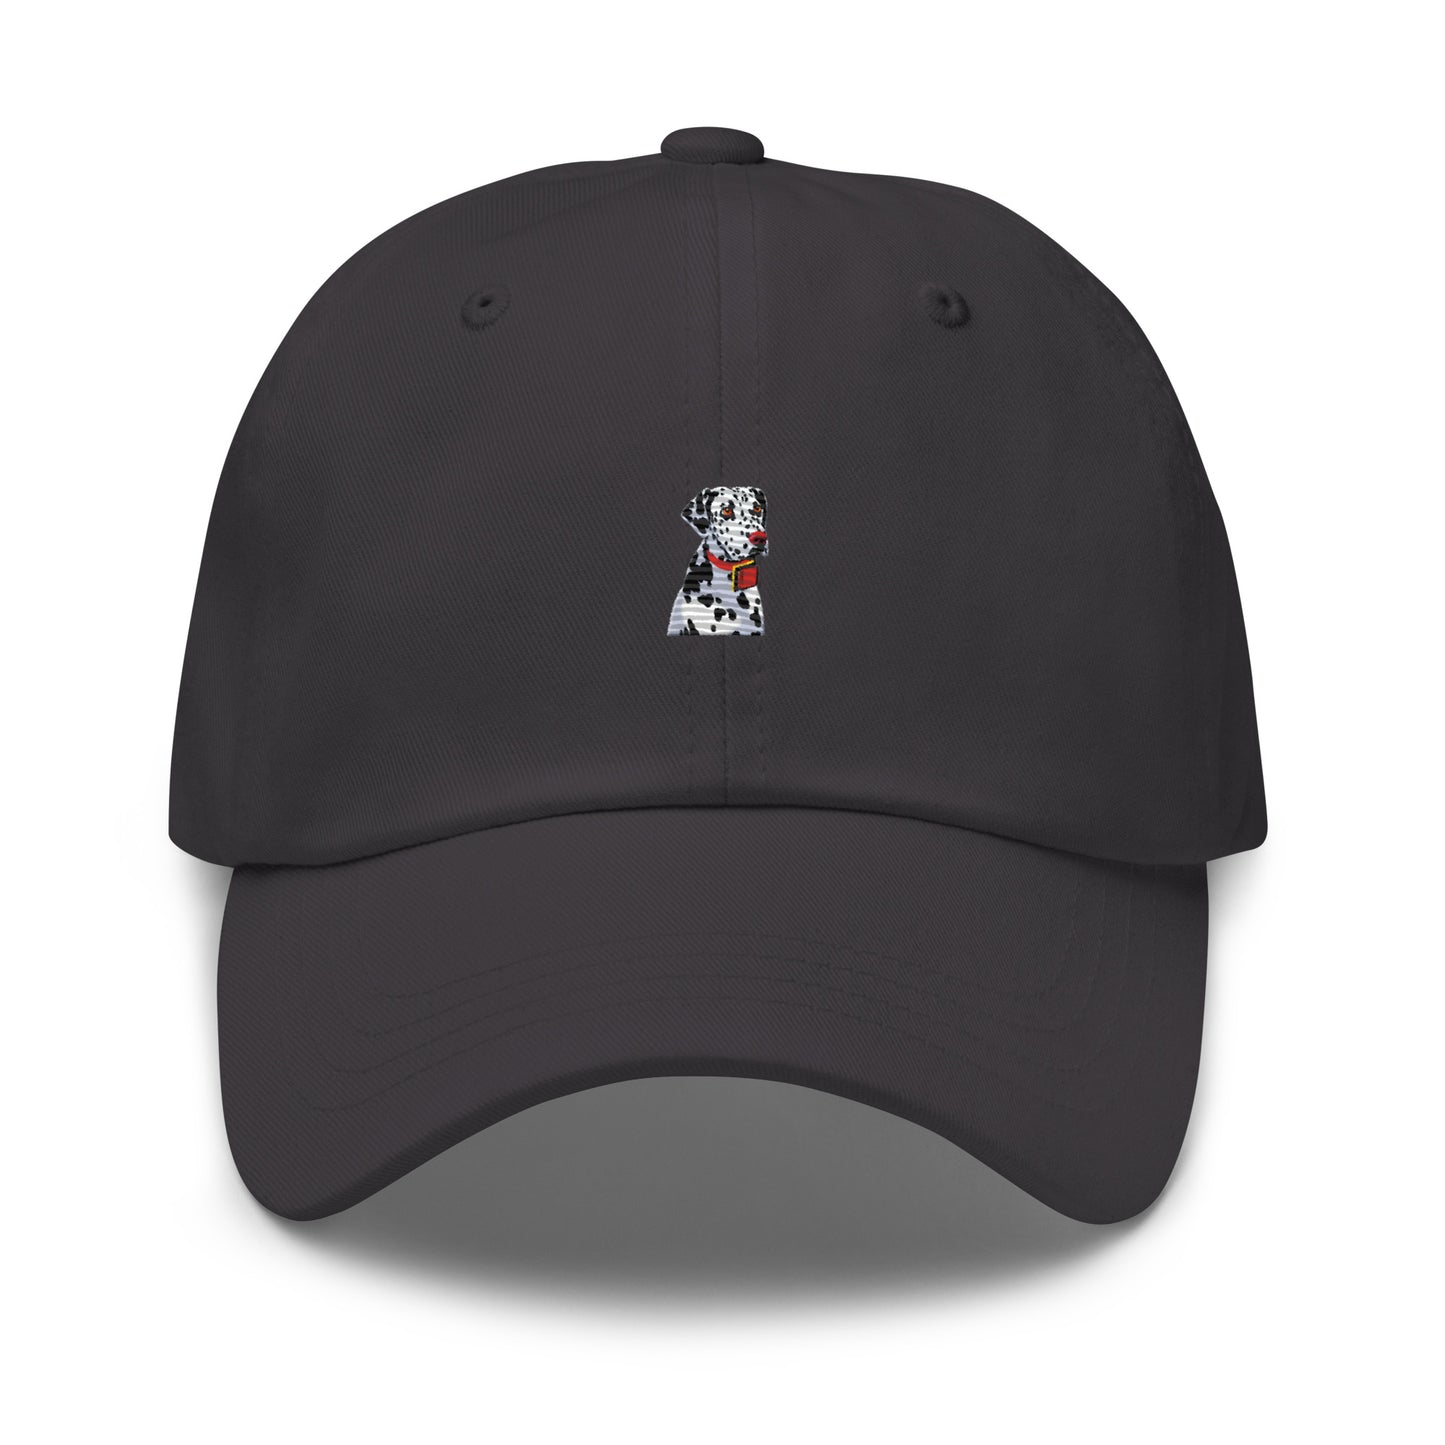 Dalmatian Embroidered Hat